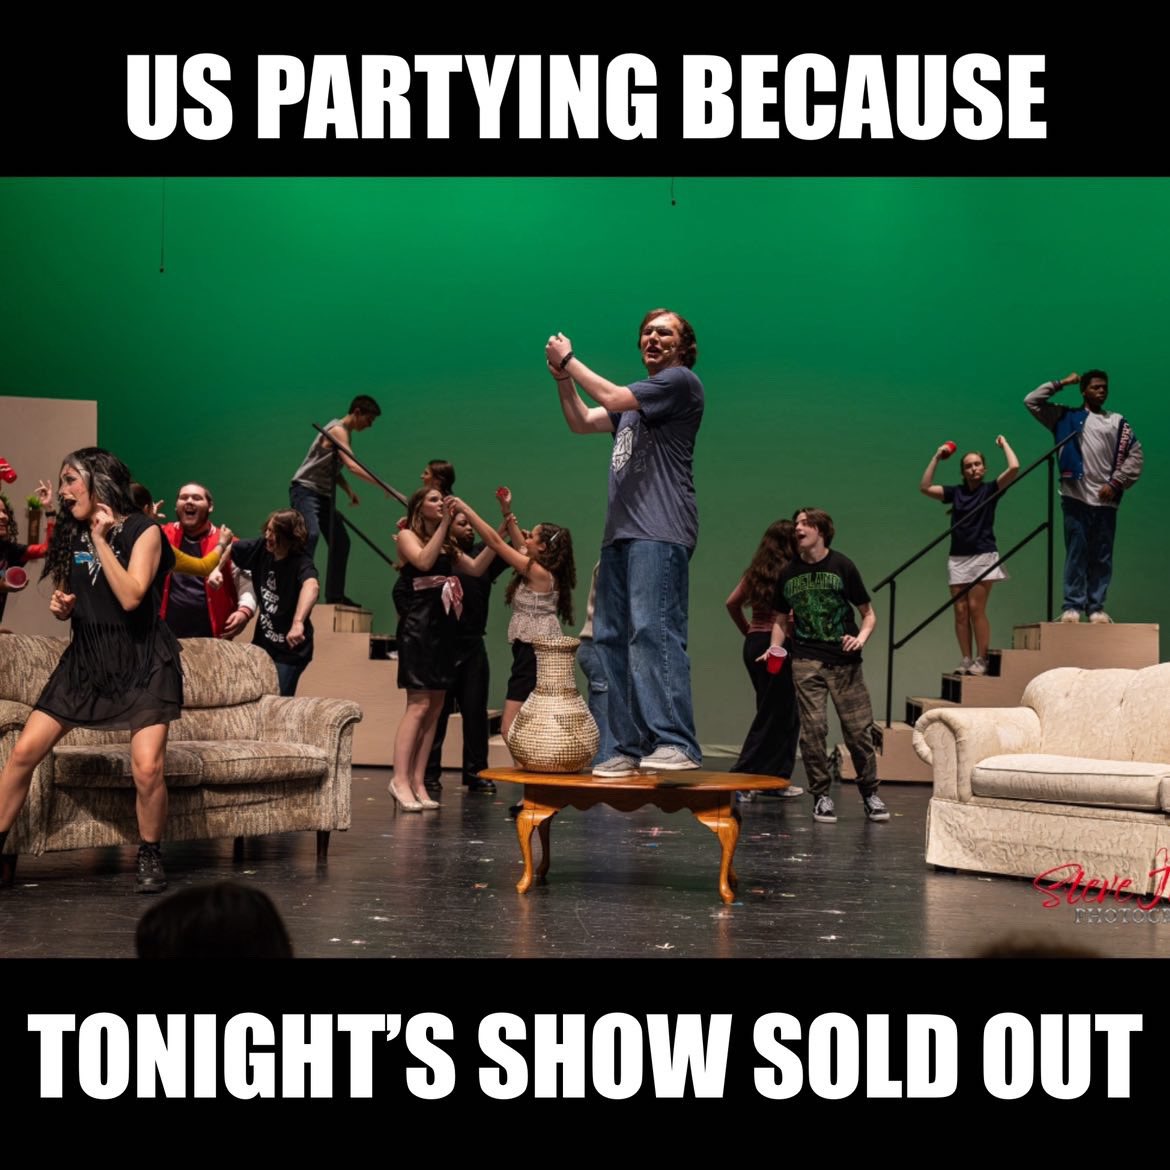 Yes, tonight’s Mean Girls show is sold old but you can still get tickets for tomorrow’s shows if you hurry. leesville.booktix.net